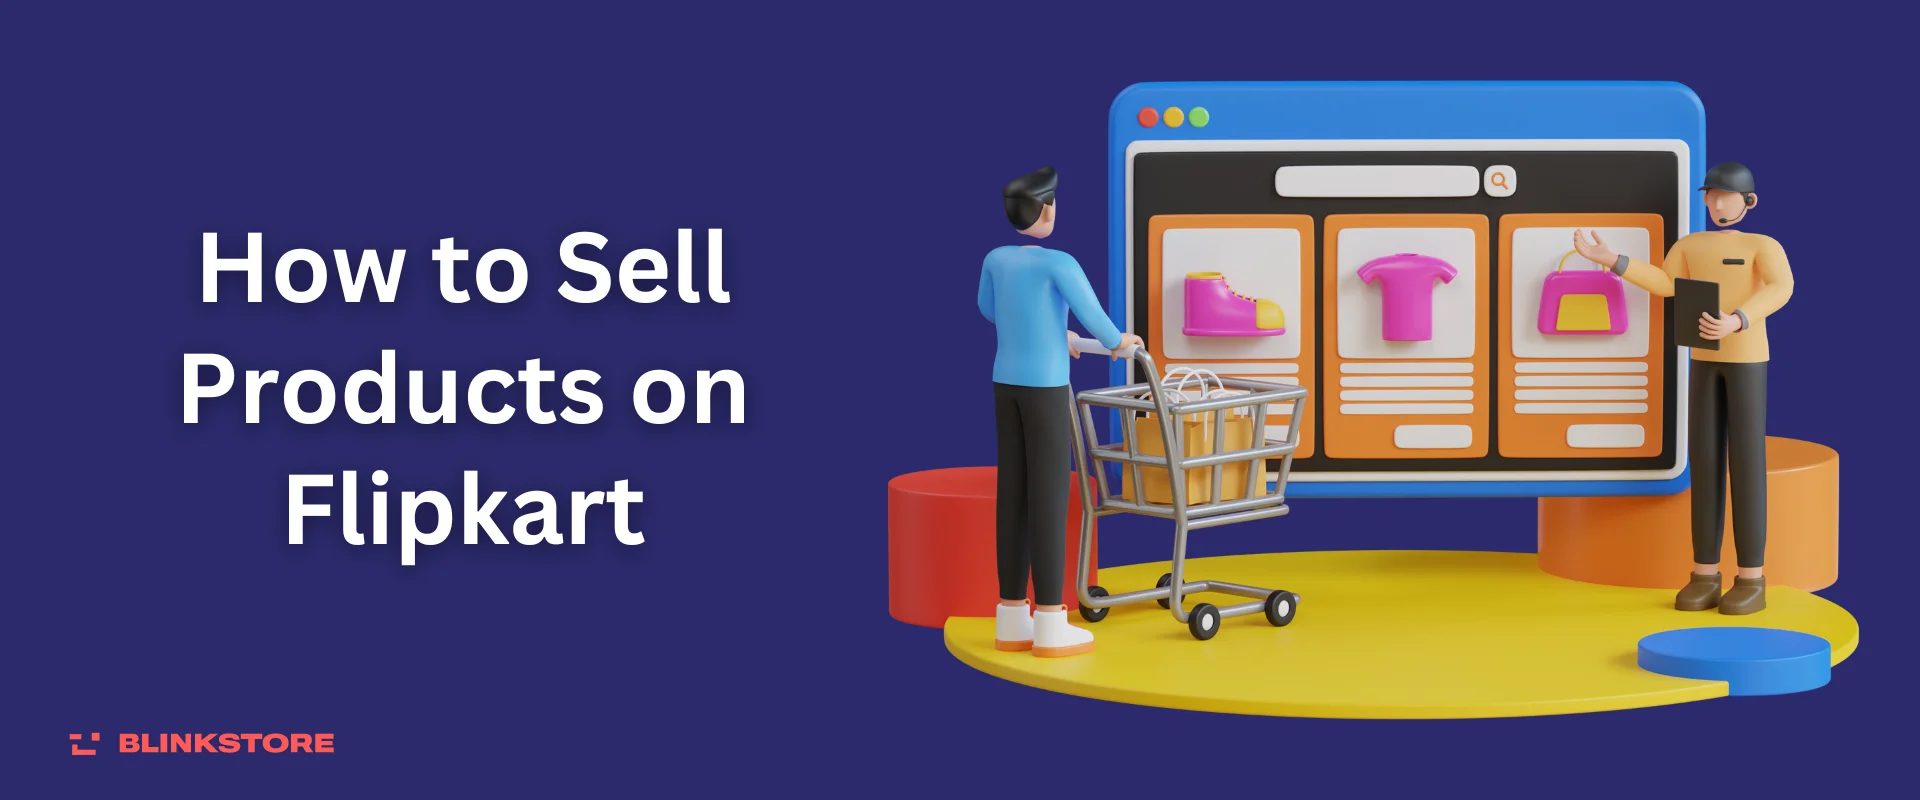 How to Sell Products on Flipkart – Guide to Become Flipkart seller